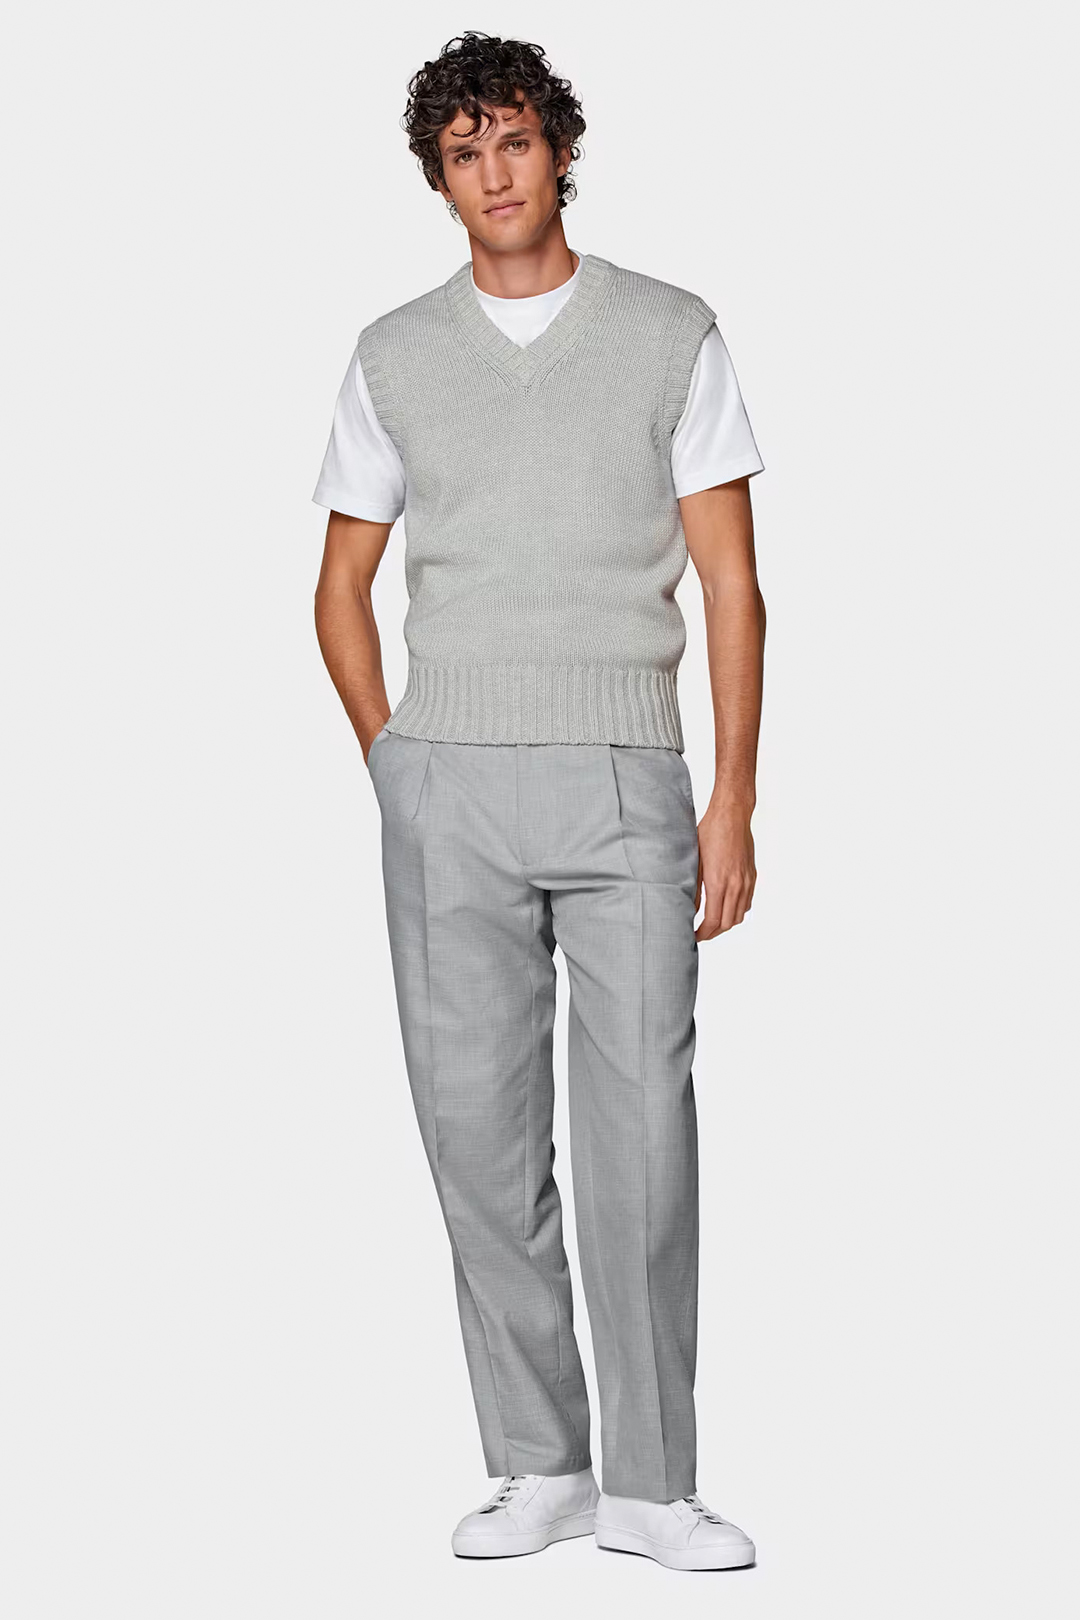 Grey sweater vest, white t-shirt, grey dress pants and white sneakers outfit